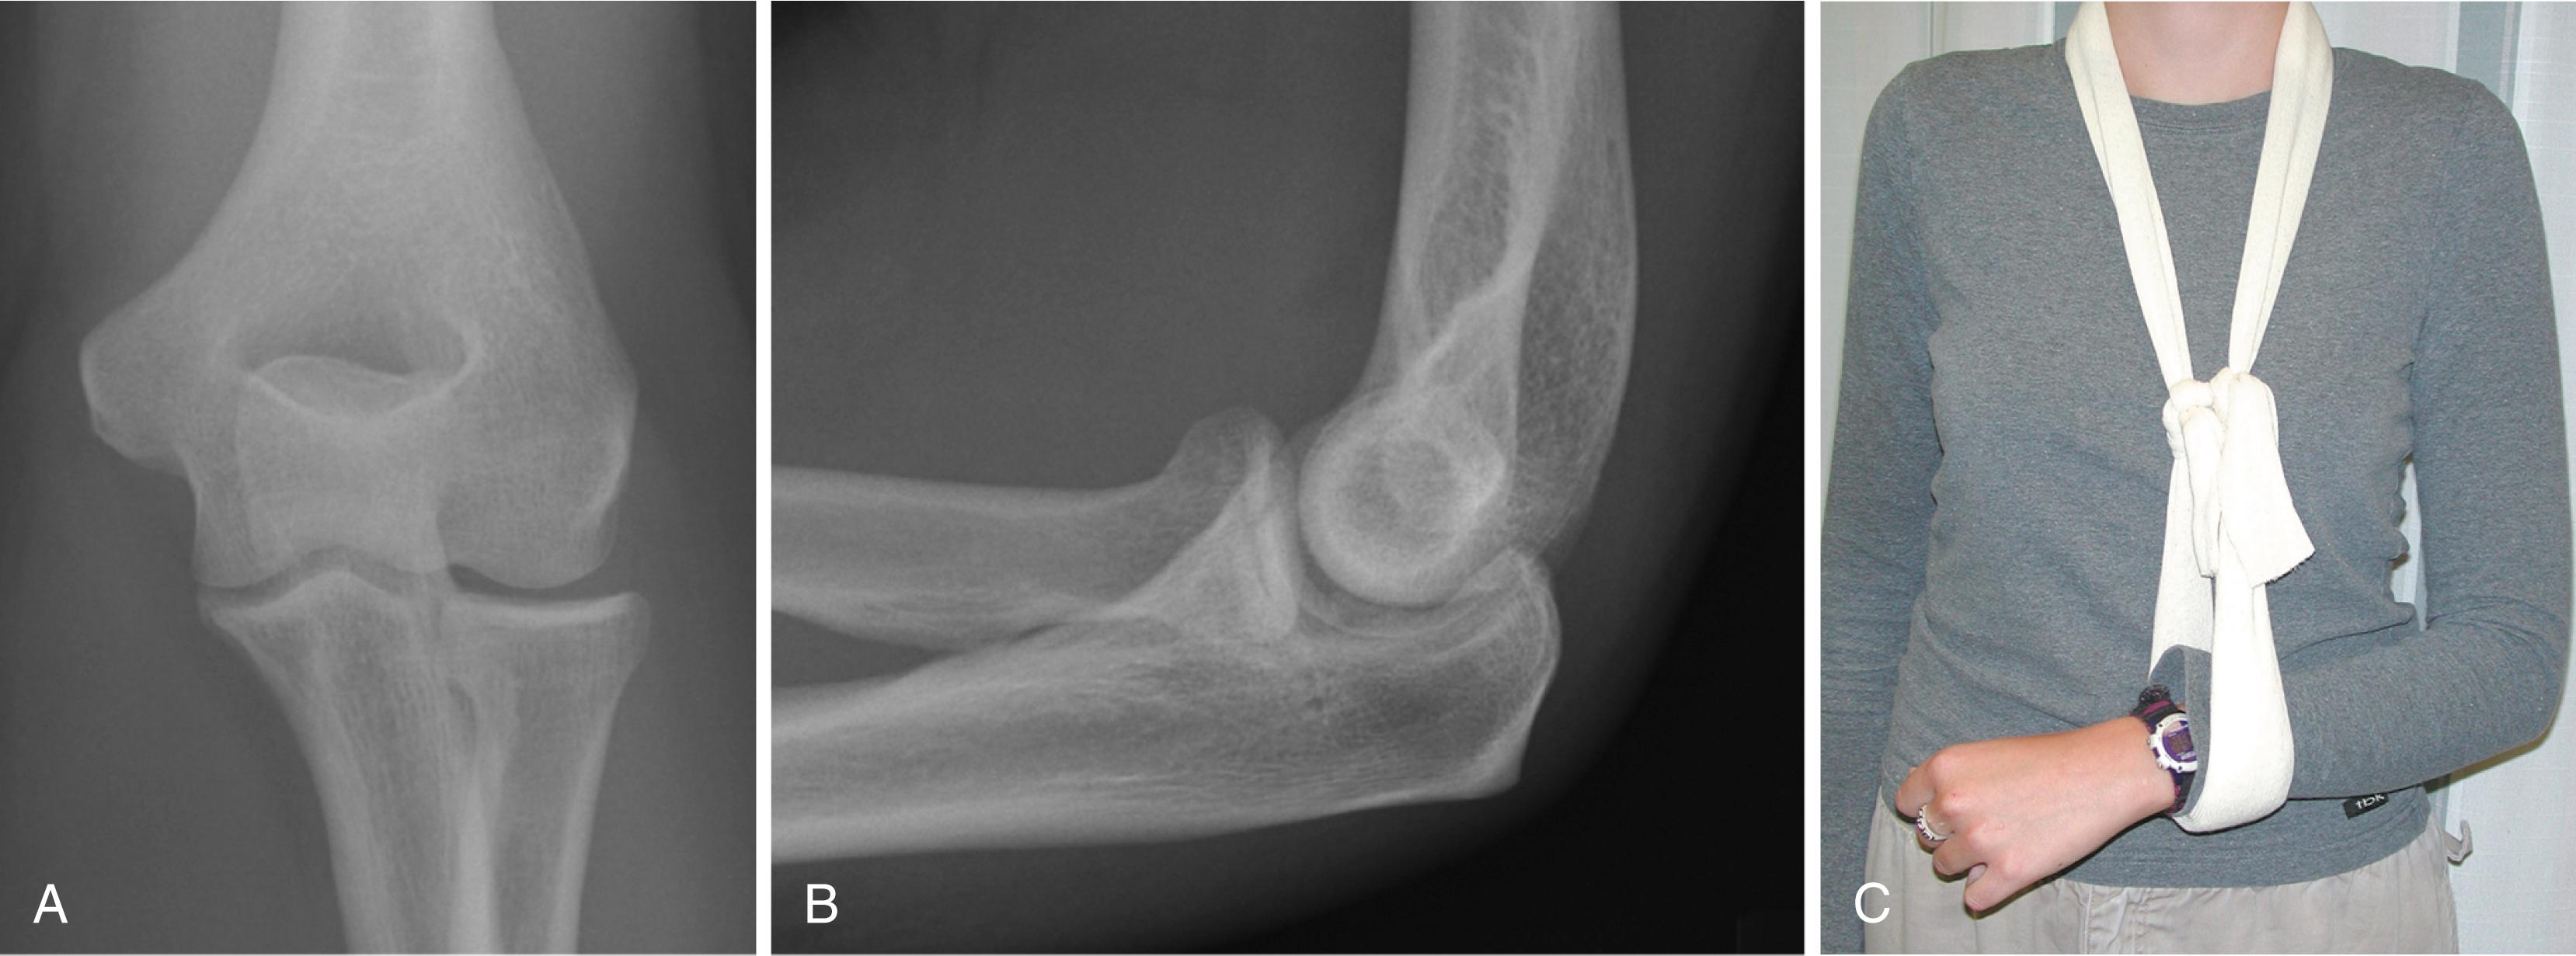 Fig. 19.11, Nondisplaced fracture. Anteroposterior (A) and lateral (B) radiographs of a 28-year-old woman with a nondisplaced fracture of the radial neck. C, Management with a collar and cuff sling. The patient had a complete return of motion and no residual pain.